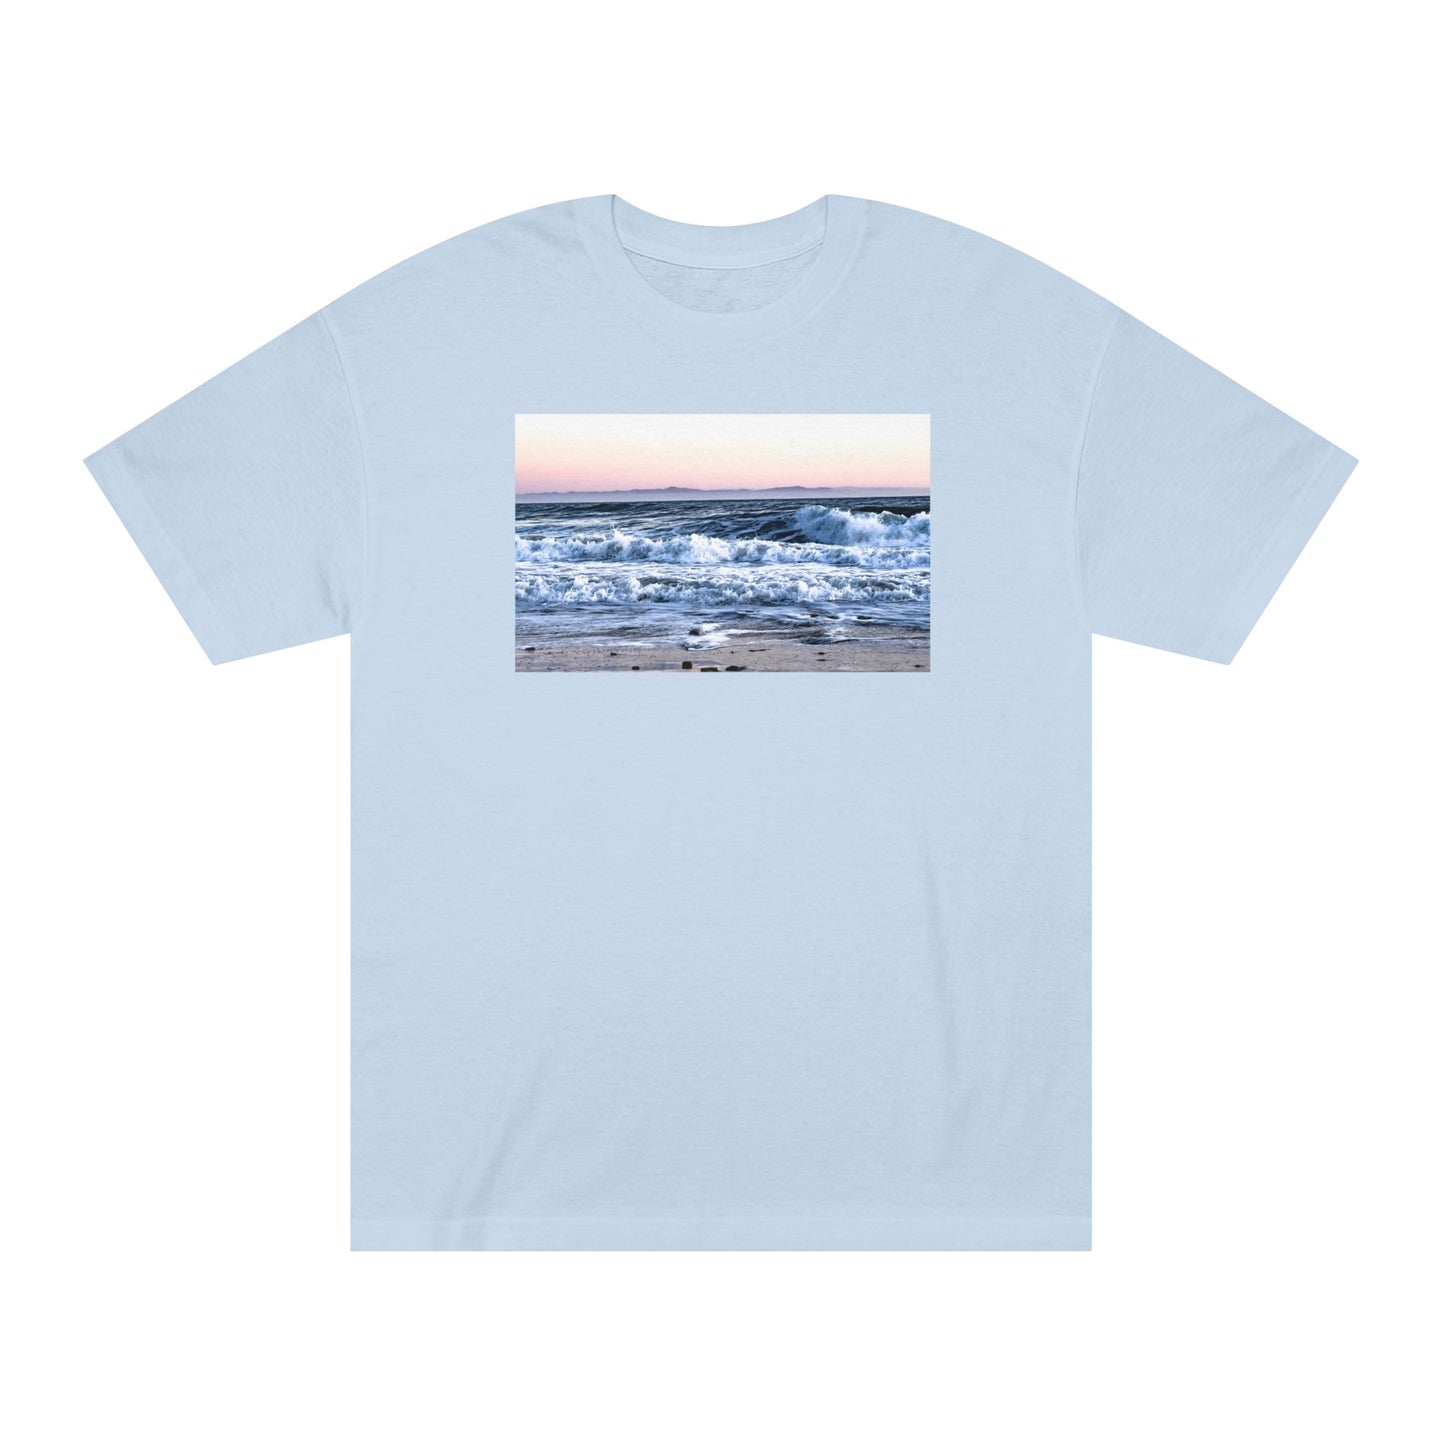 Crashing {a unisex classic tee by American Apparel}